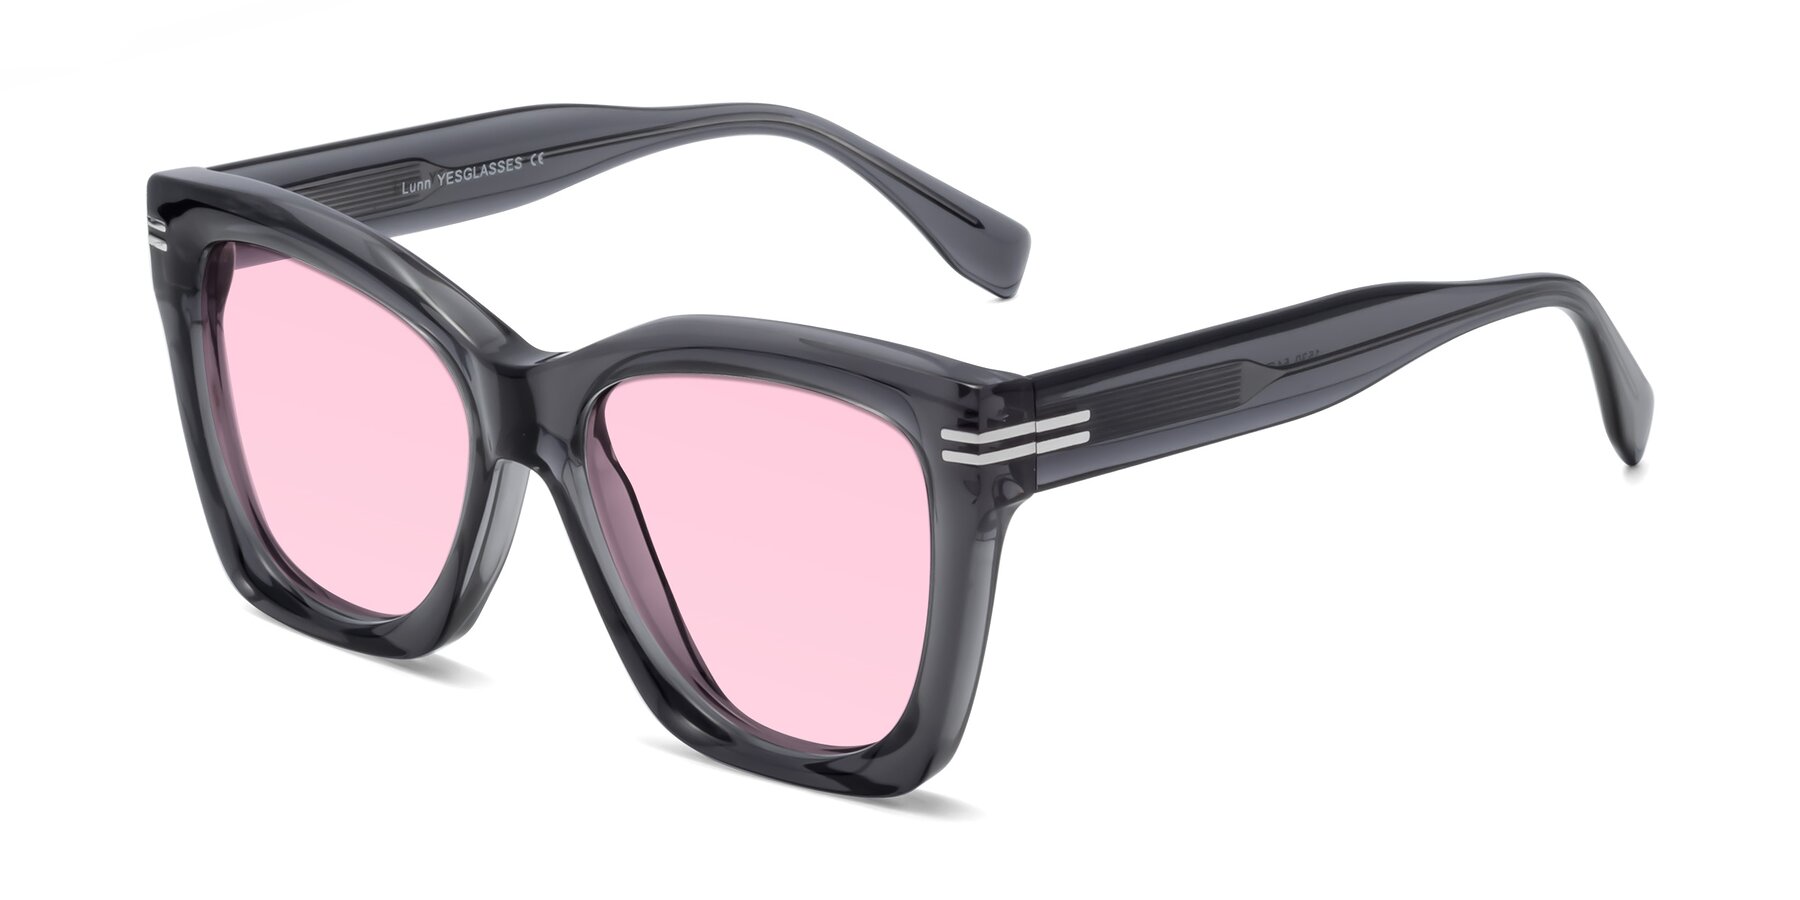 Angle of Lunn in Translucent Gray with Light Pink Tinted Lenses